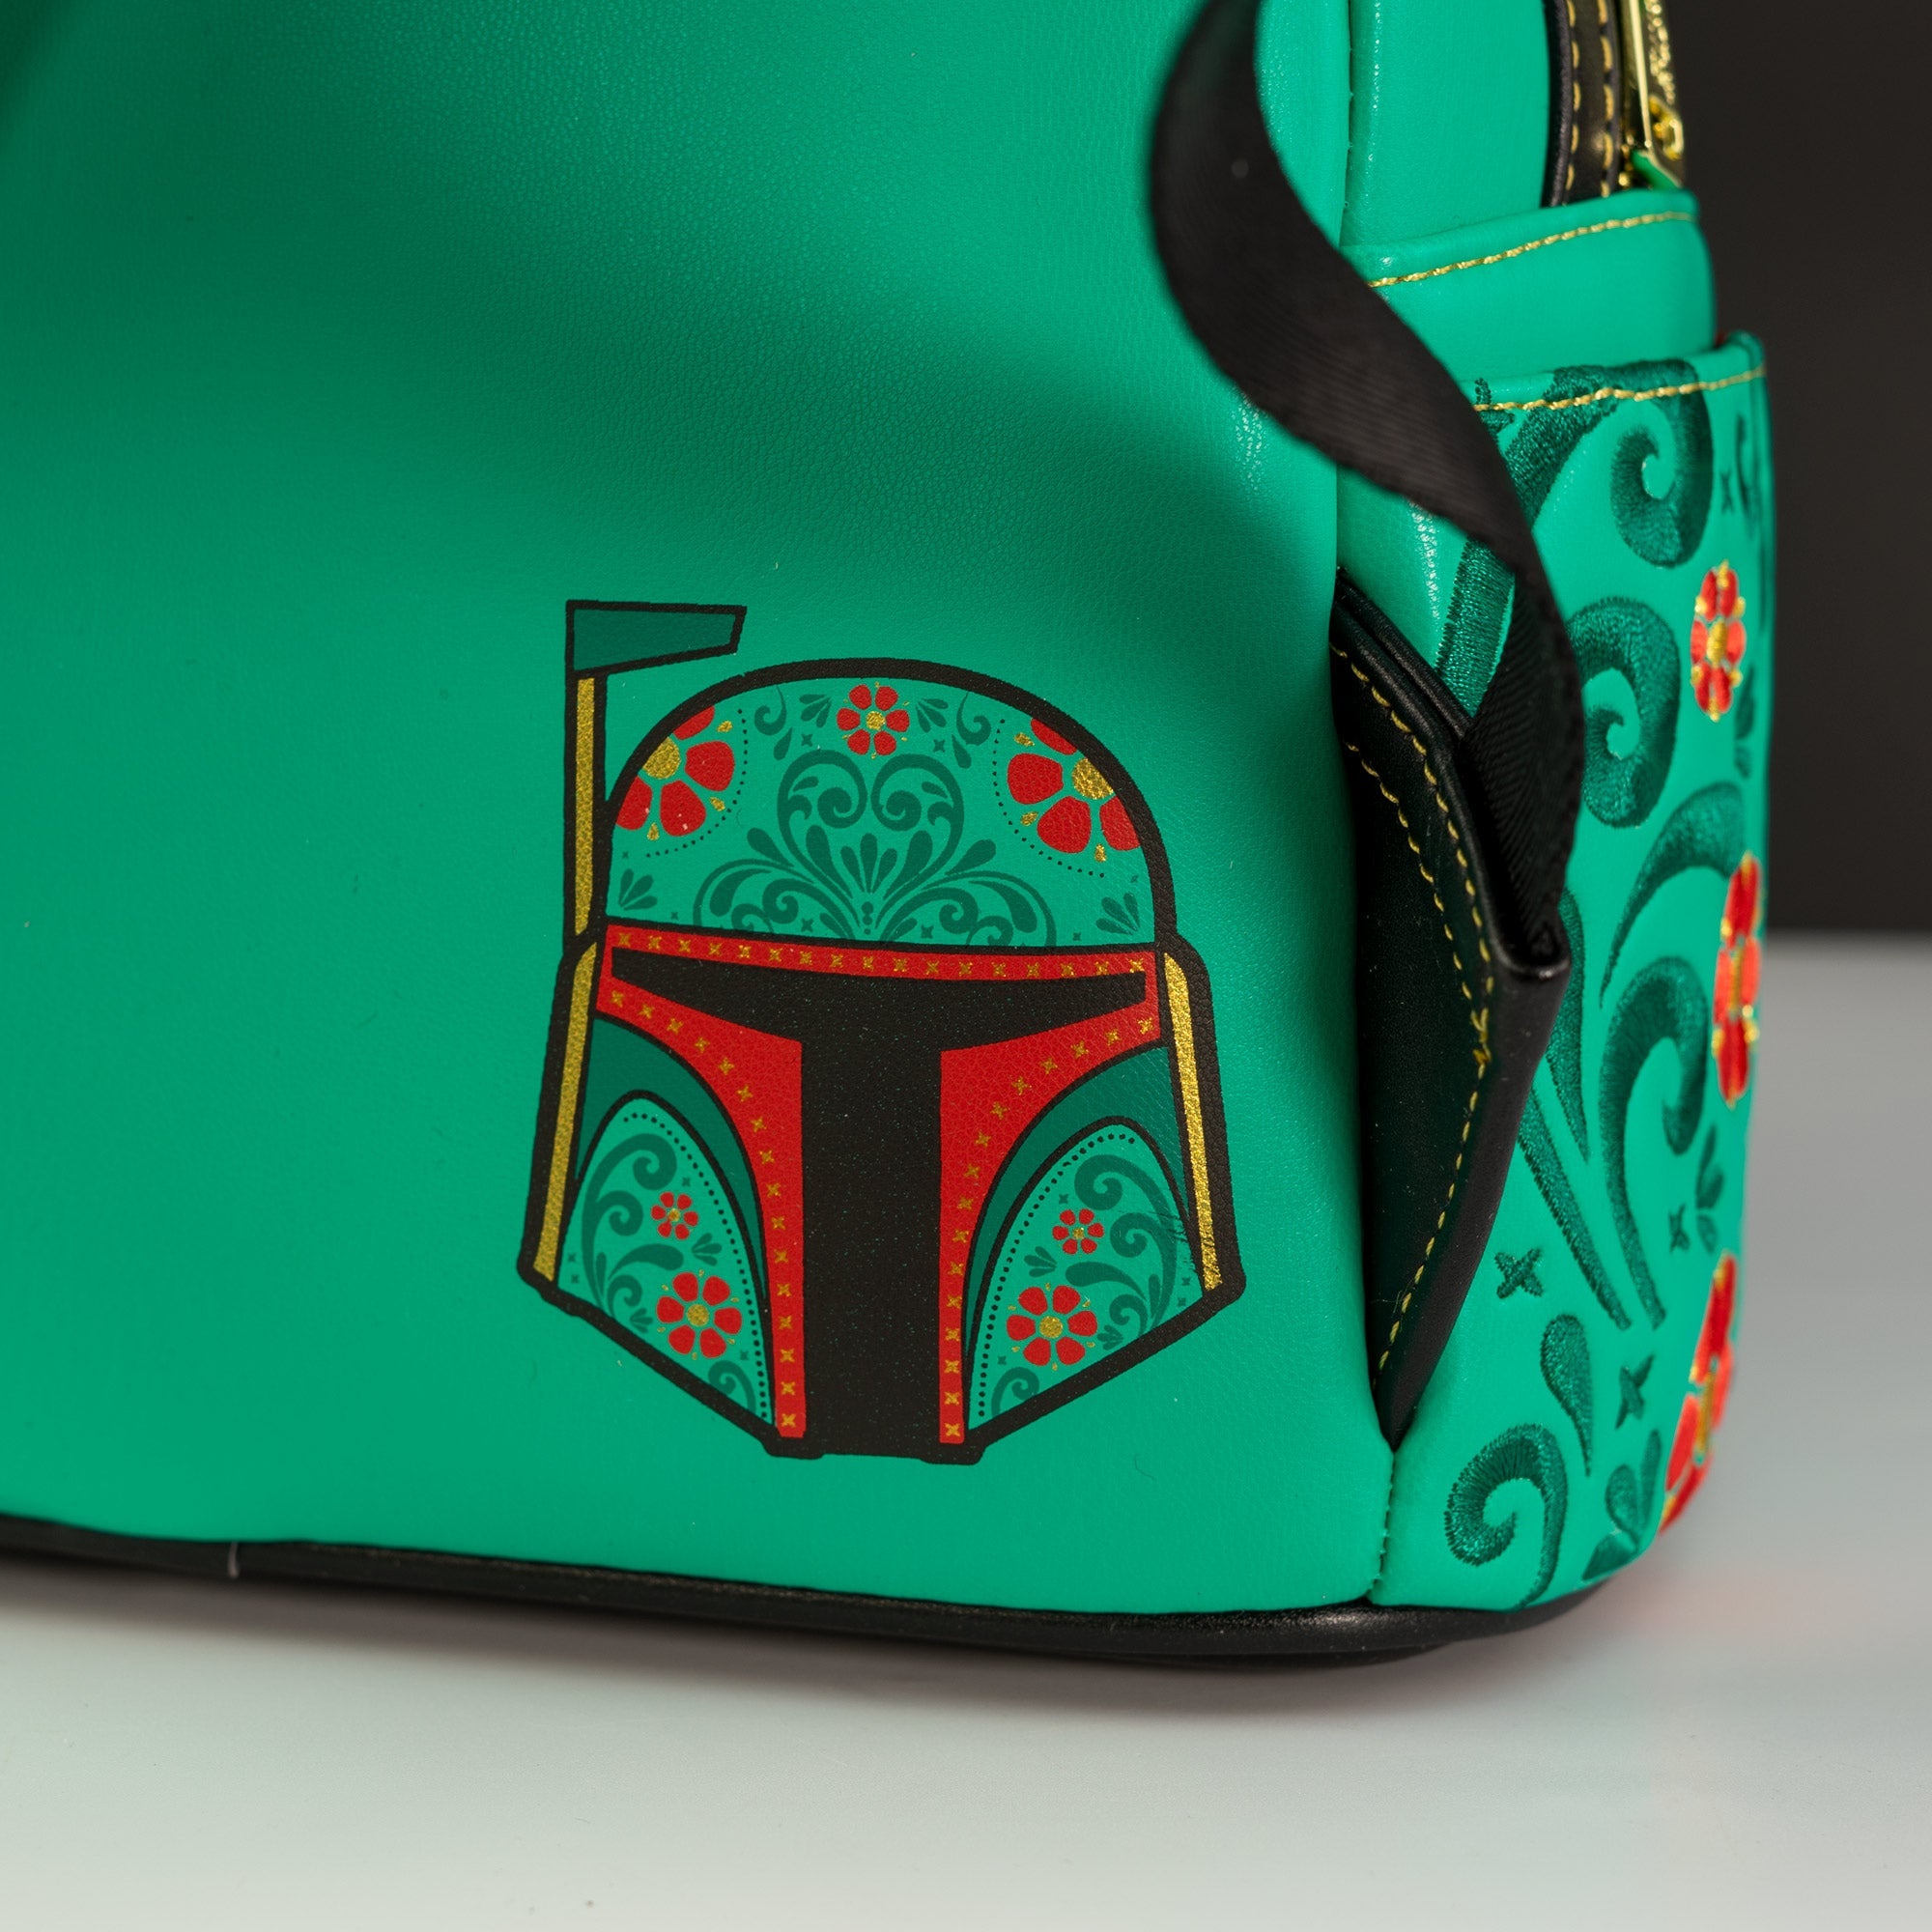 Loungefly x Star Wars Boba Fett Floral Cosplay Mini Backpack - GeekCore